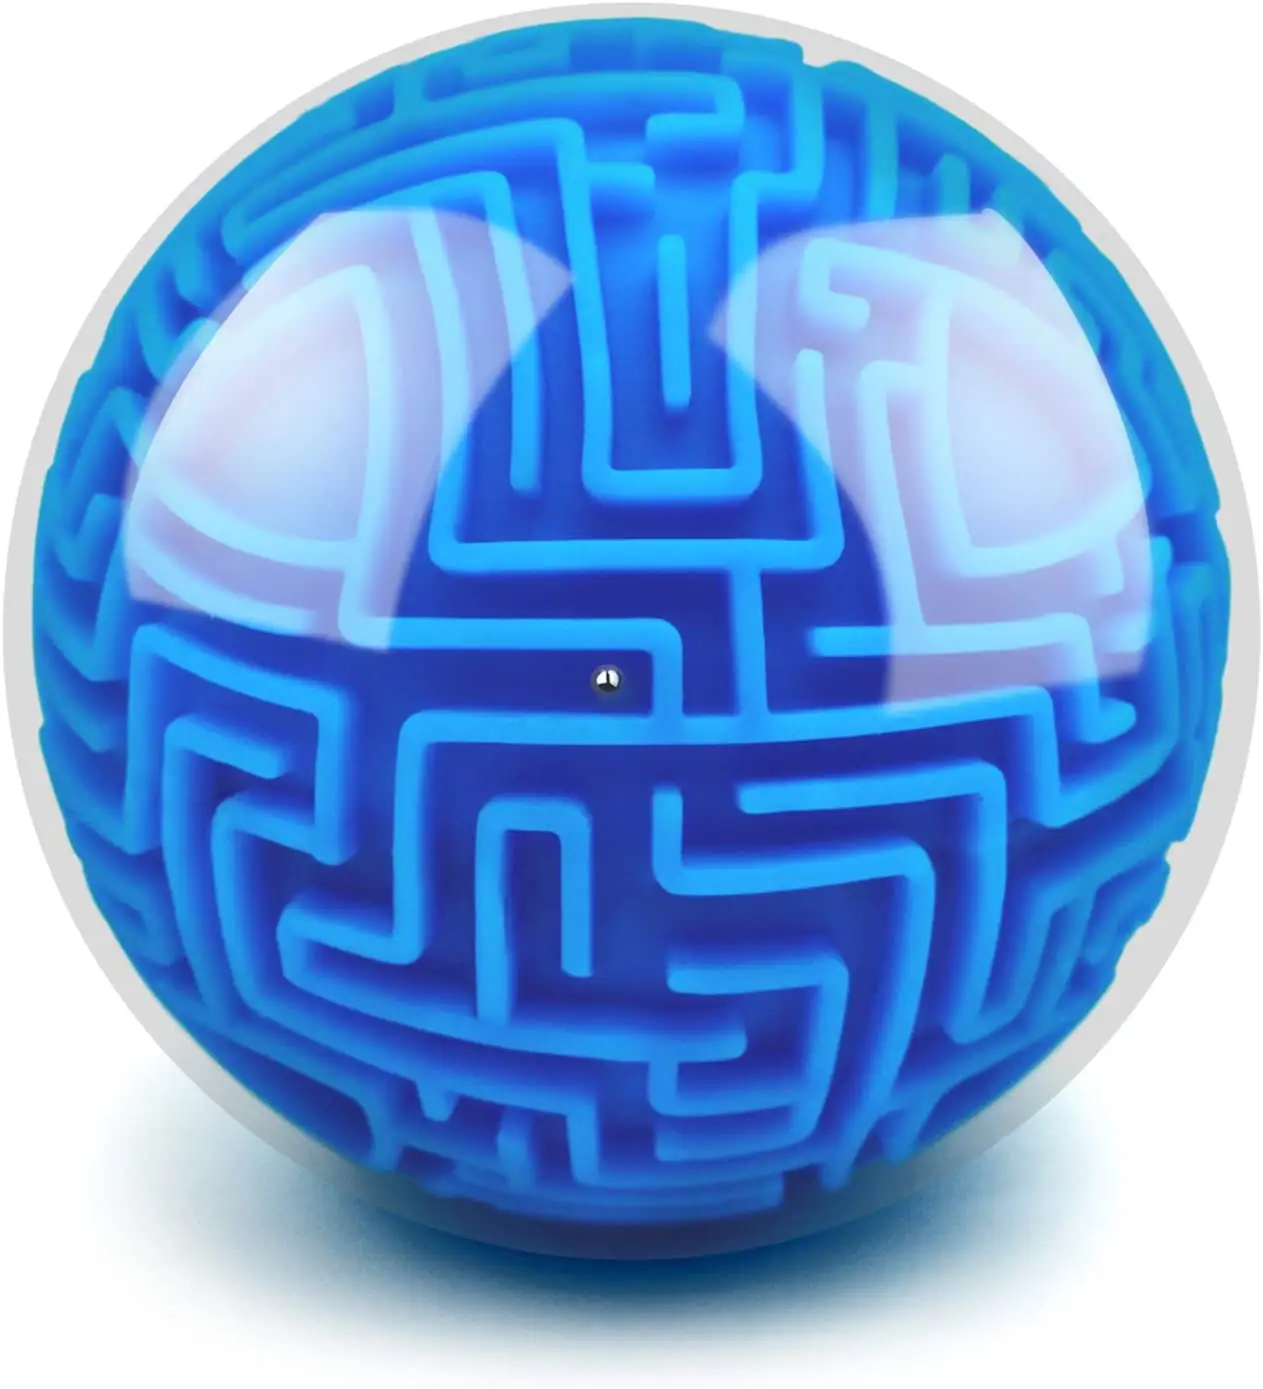 3D Gravity Memory Sequential Maze Ball Puzzle Toy Gifts for Kids Adults Challenges Game Lover Tiny Balls Brain Teasers Games